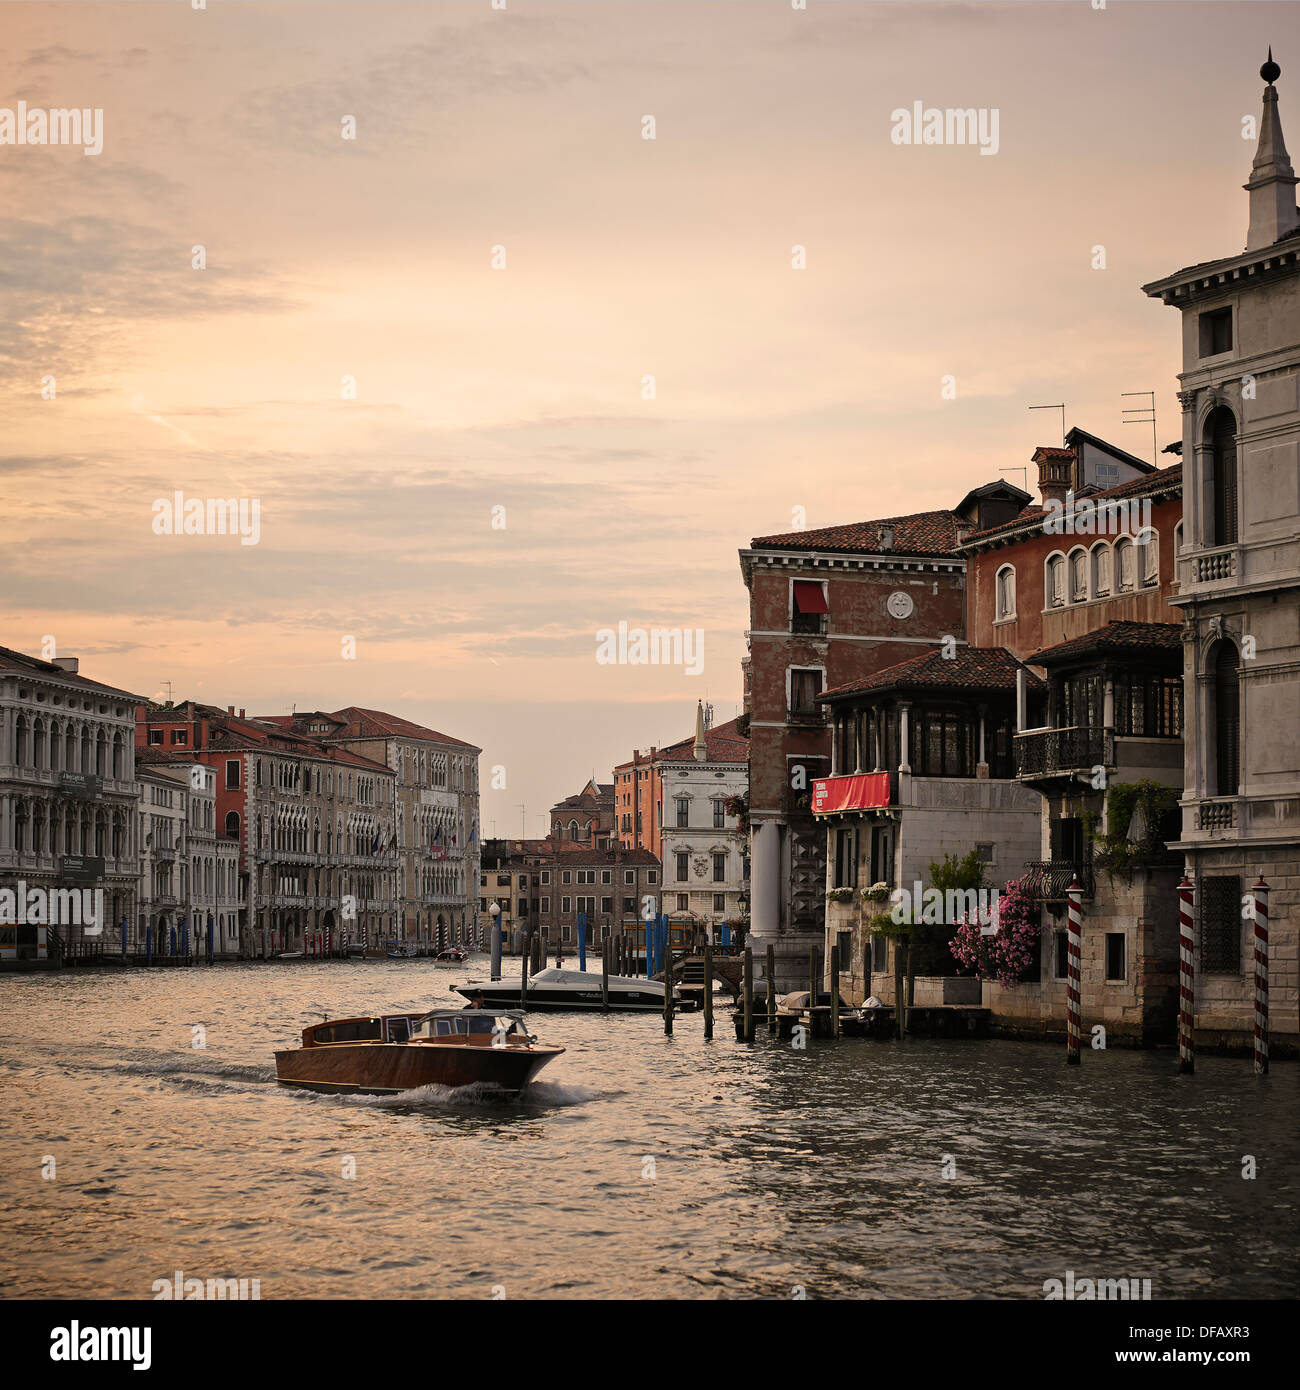 Water Taxi on the Grand Canal, Venice, Italy, Europe. Stock Photo